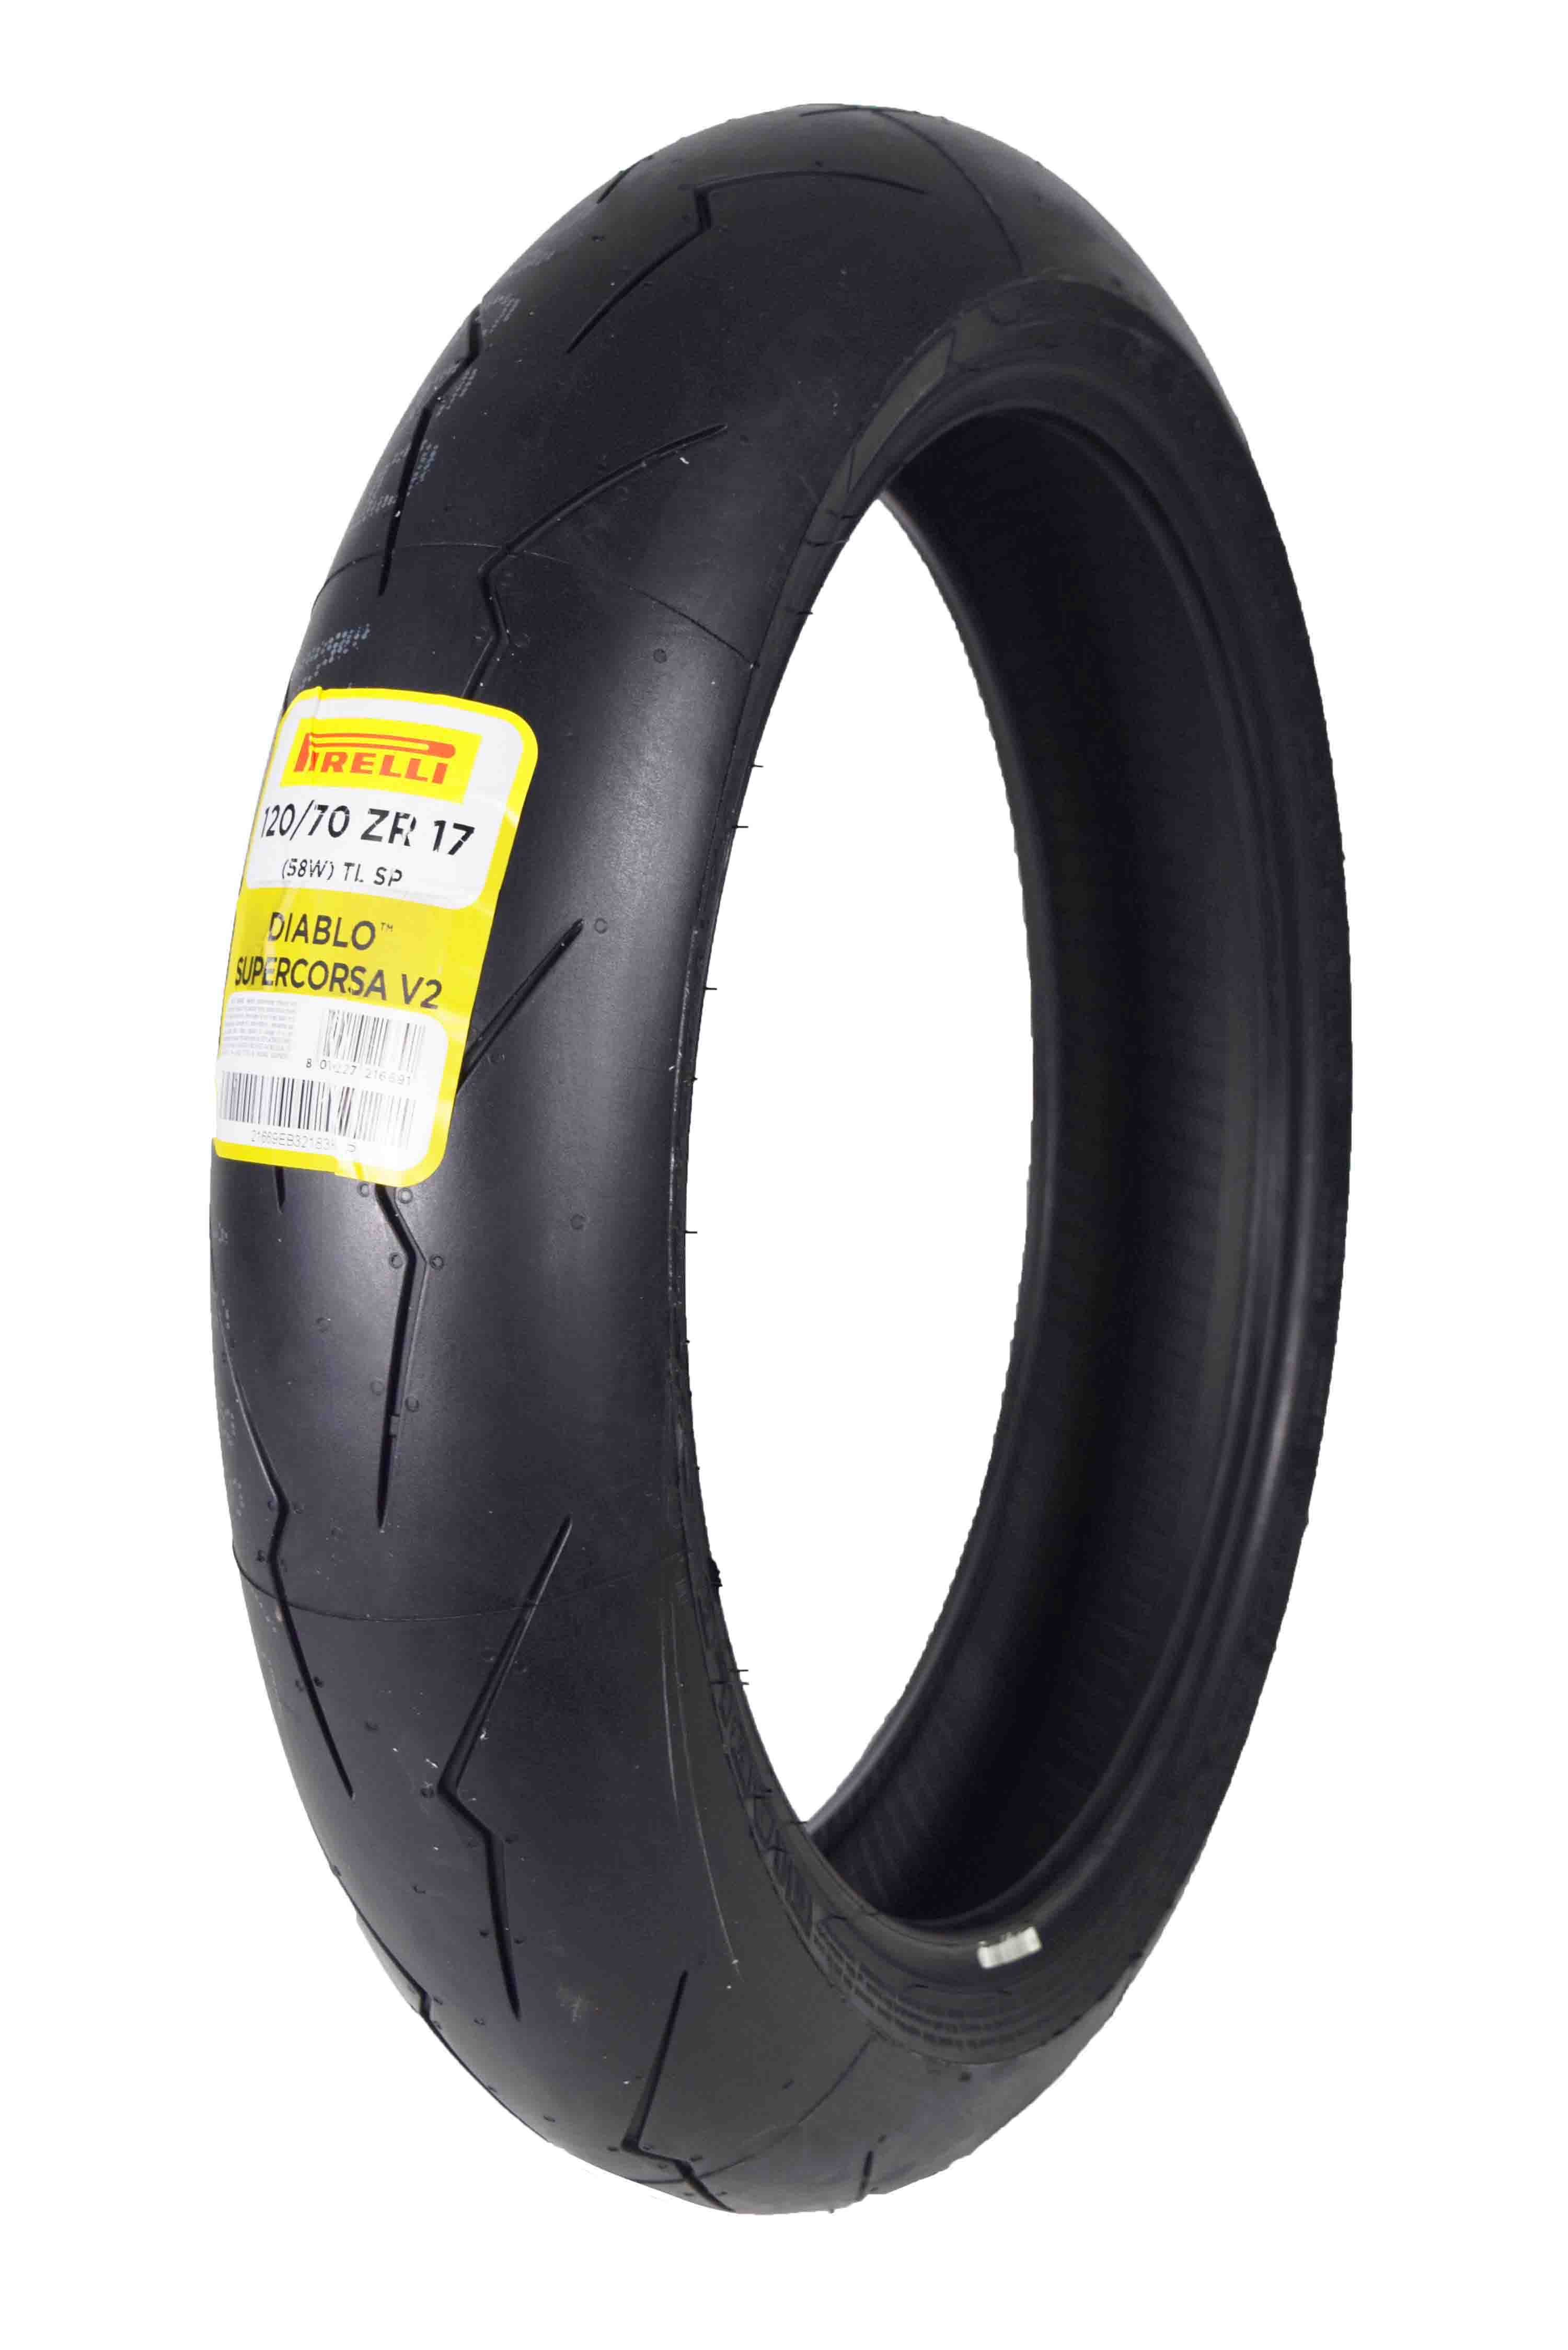 Pirelli-Tire-120-70ZR17-SUPER-CORSA-V2-Radial-Motorcycle-Front-Tire-120-70-17-image-1